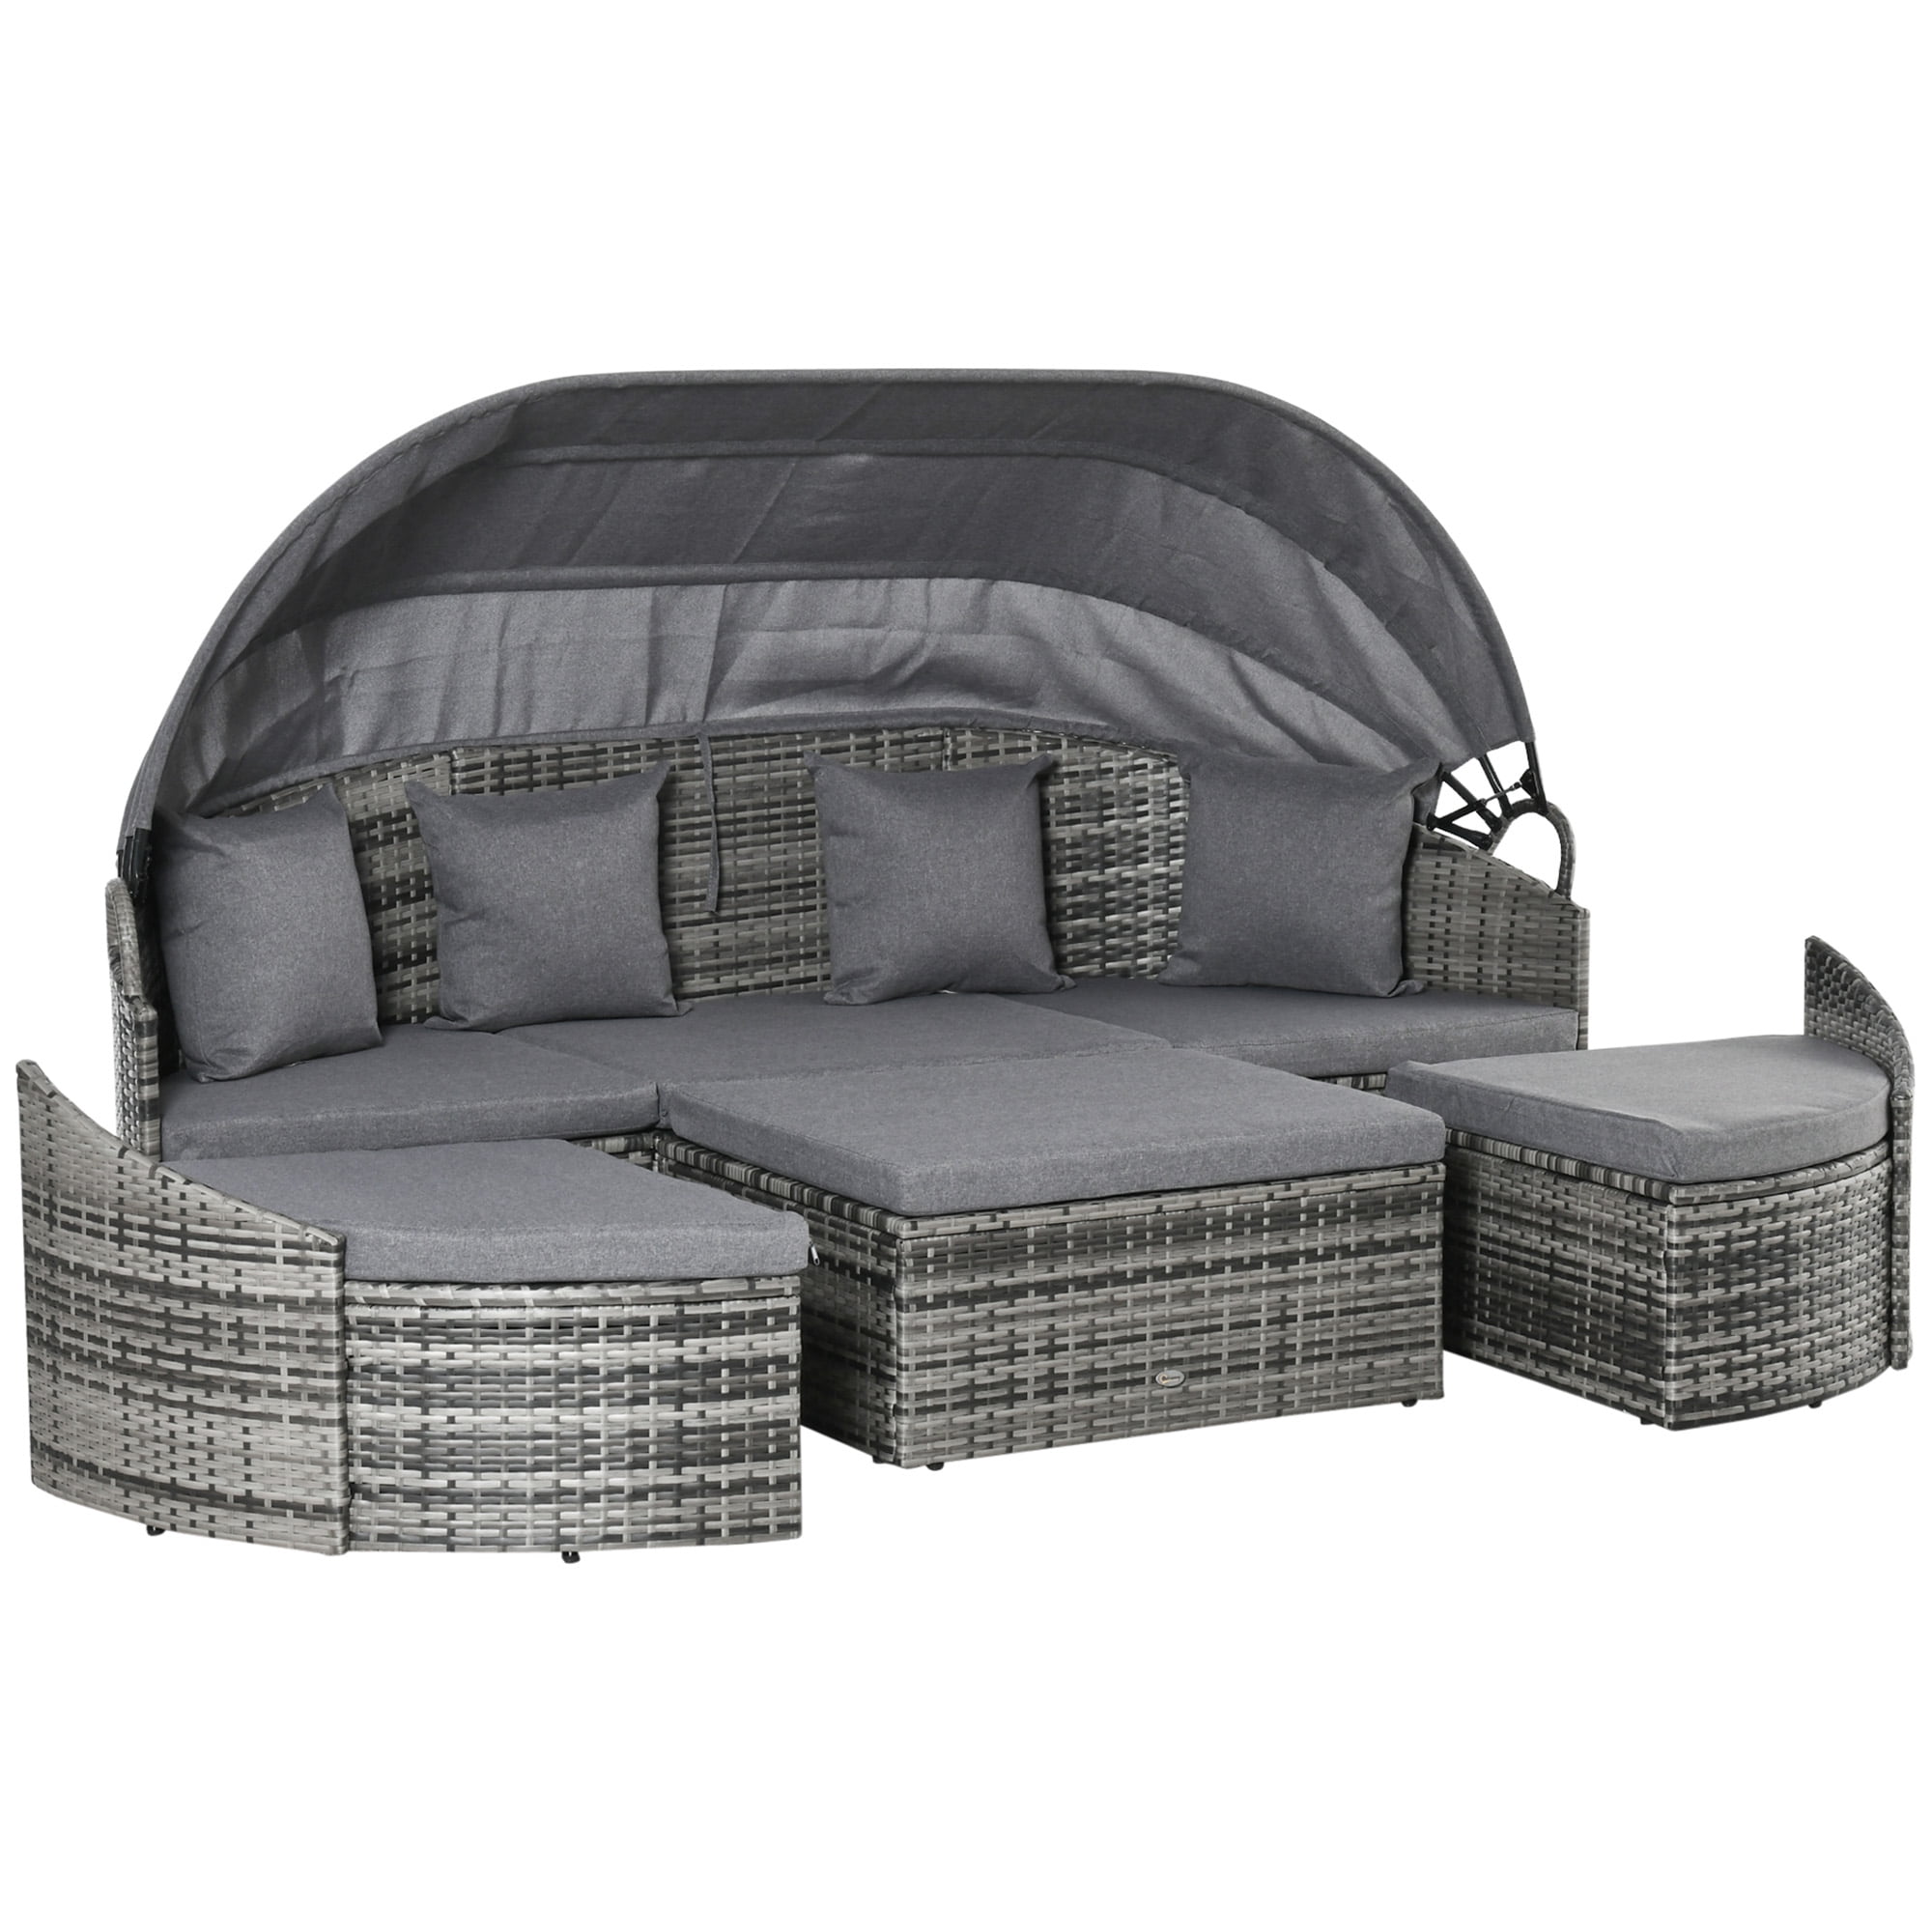 Outsunny 4 Pieces Patio PE Wicker Lounge Outdoor Rattan Conversation Furniture Set, Round Sofa Bed with Cannopy, Cushioned, and Pillows, Grey - Walmart.com